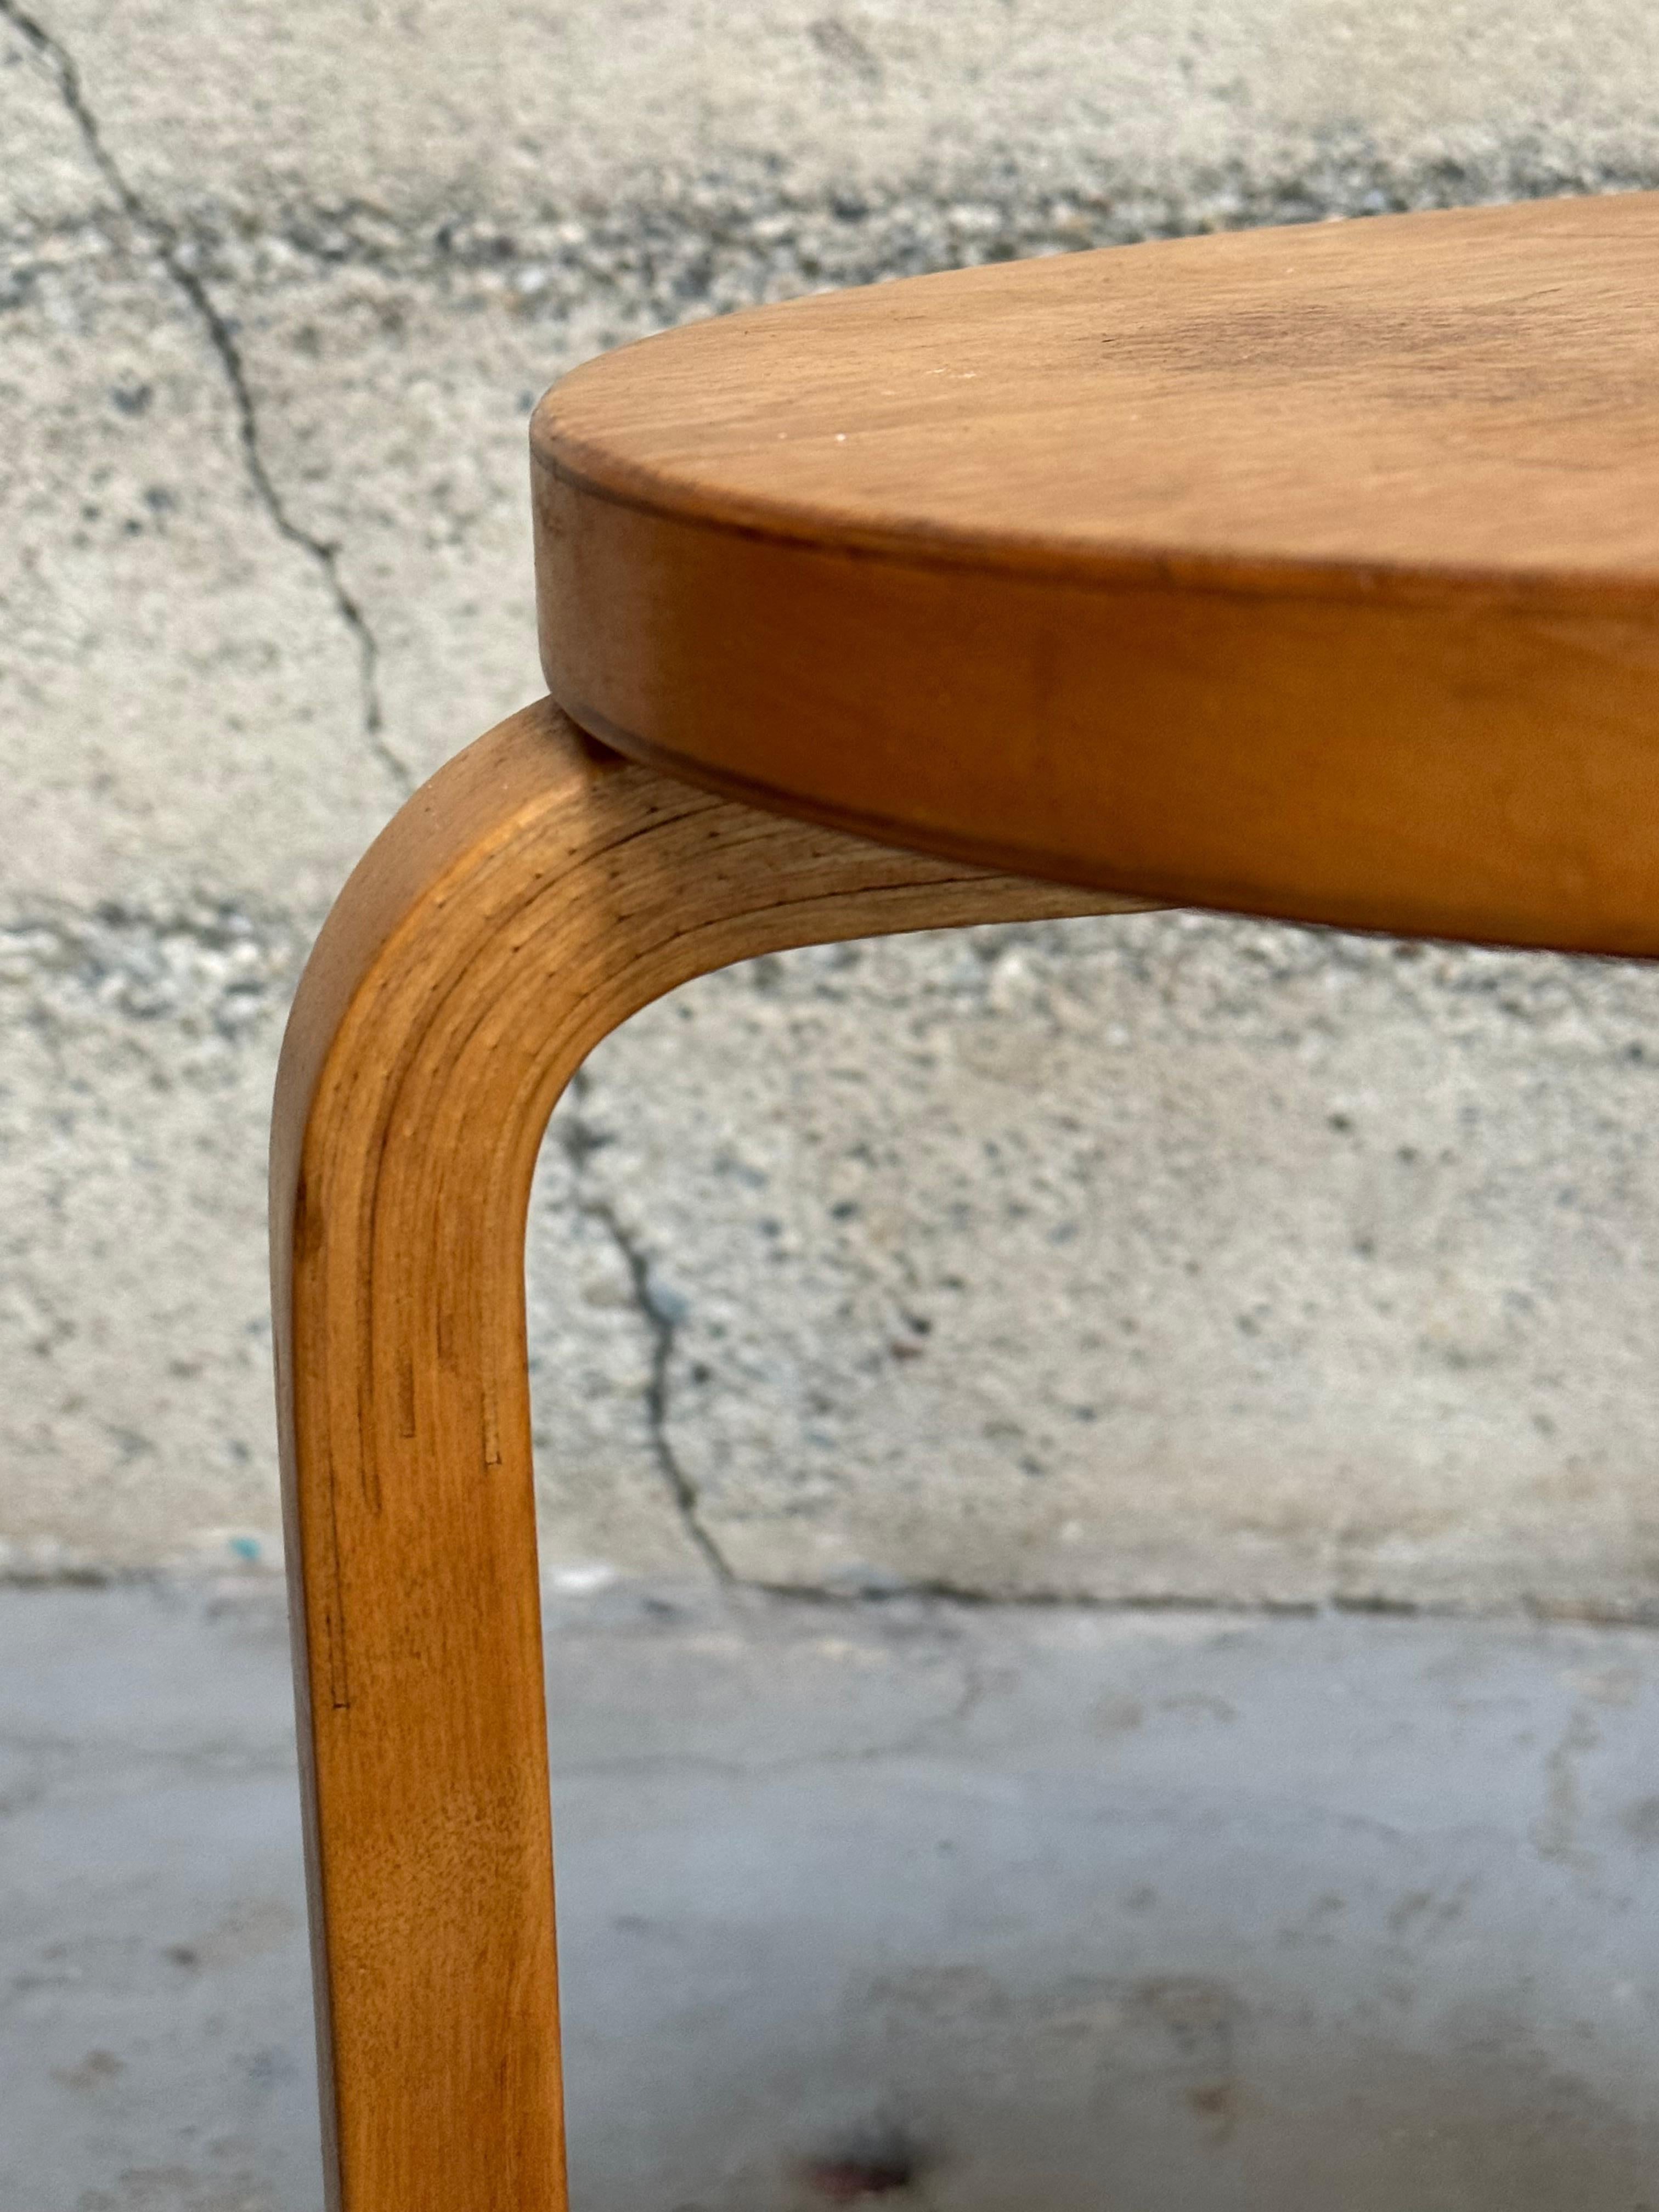 Hand-Crafted Early Production Alvar Aalto Model 60 Stool Finsven Late 1940s For Sale